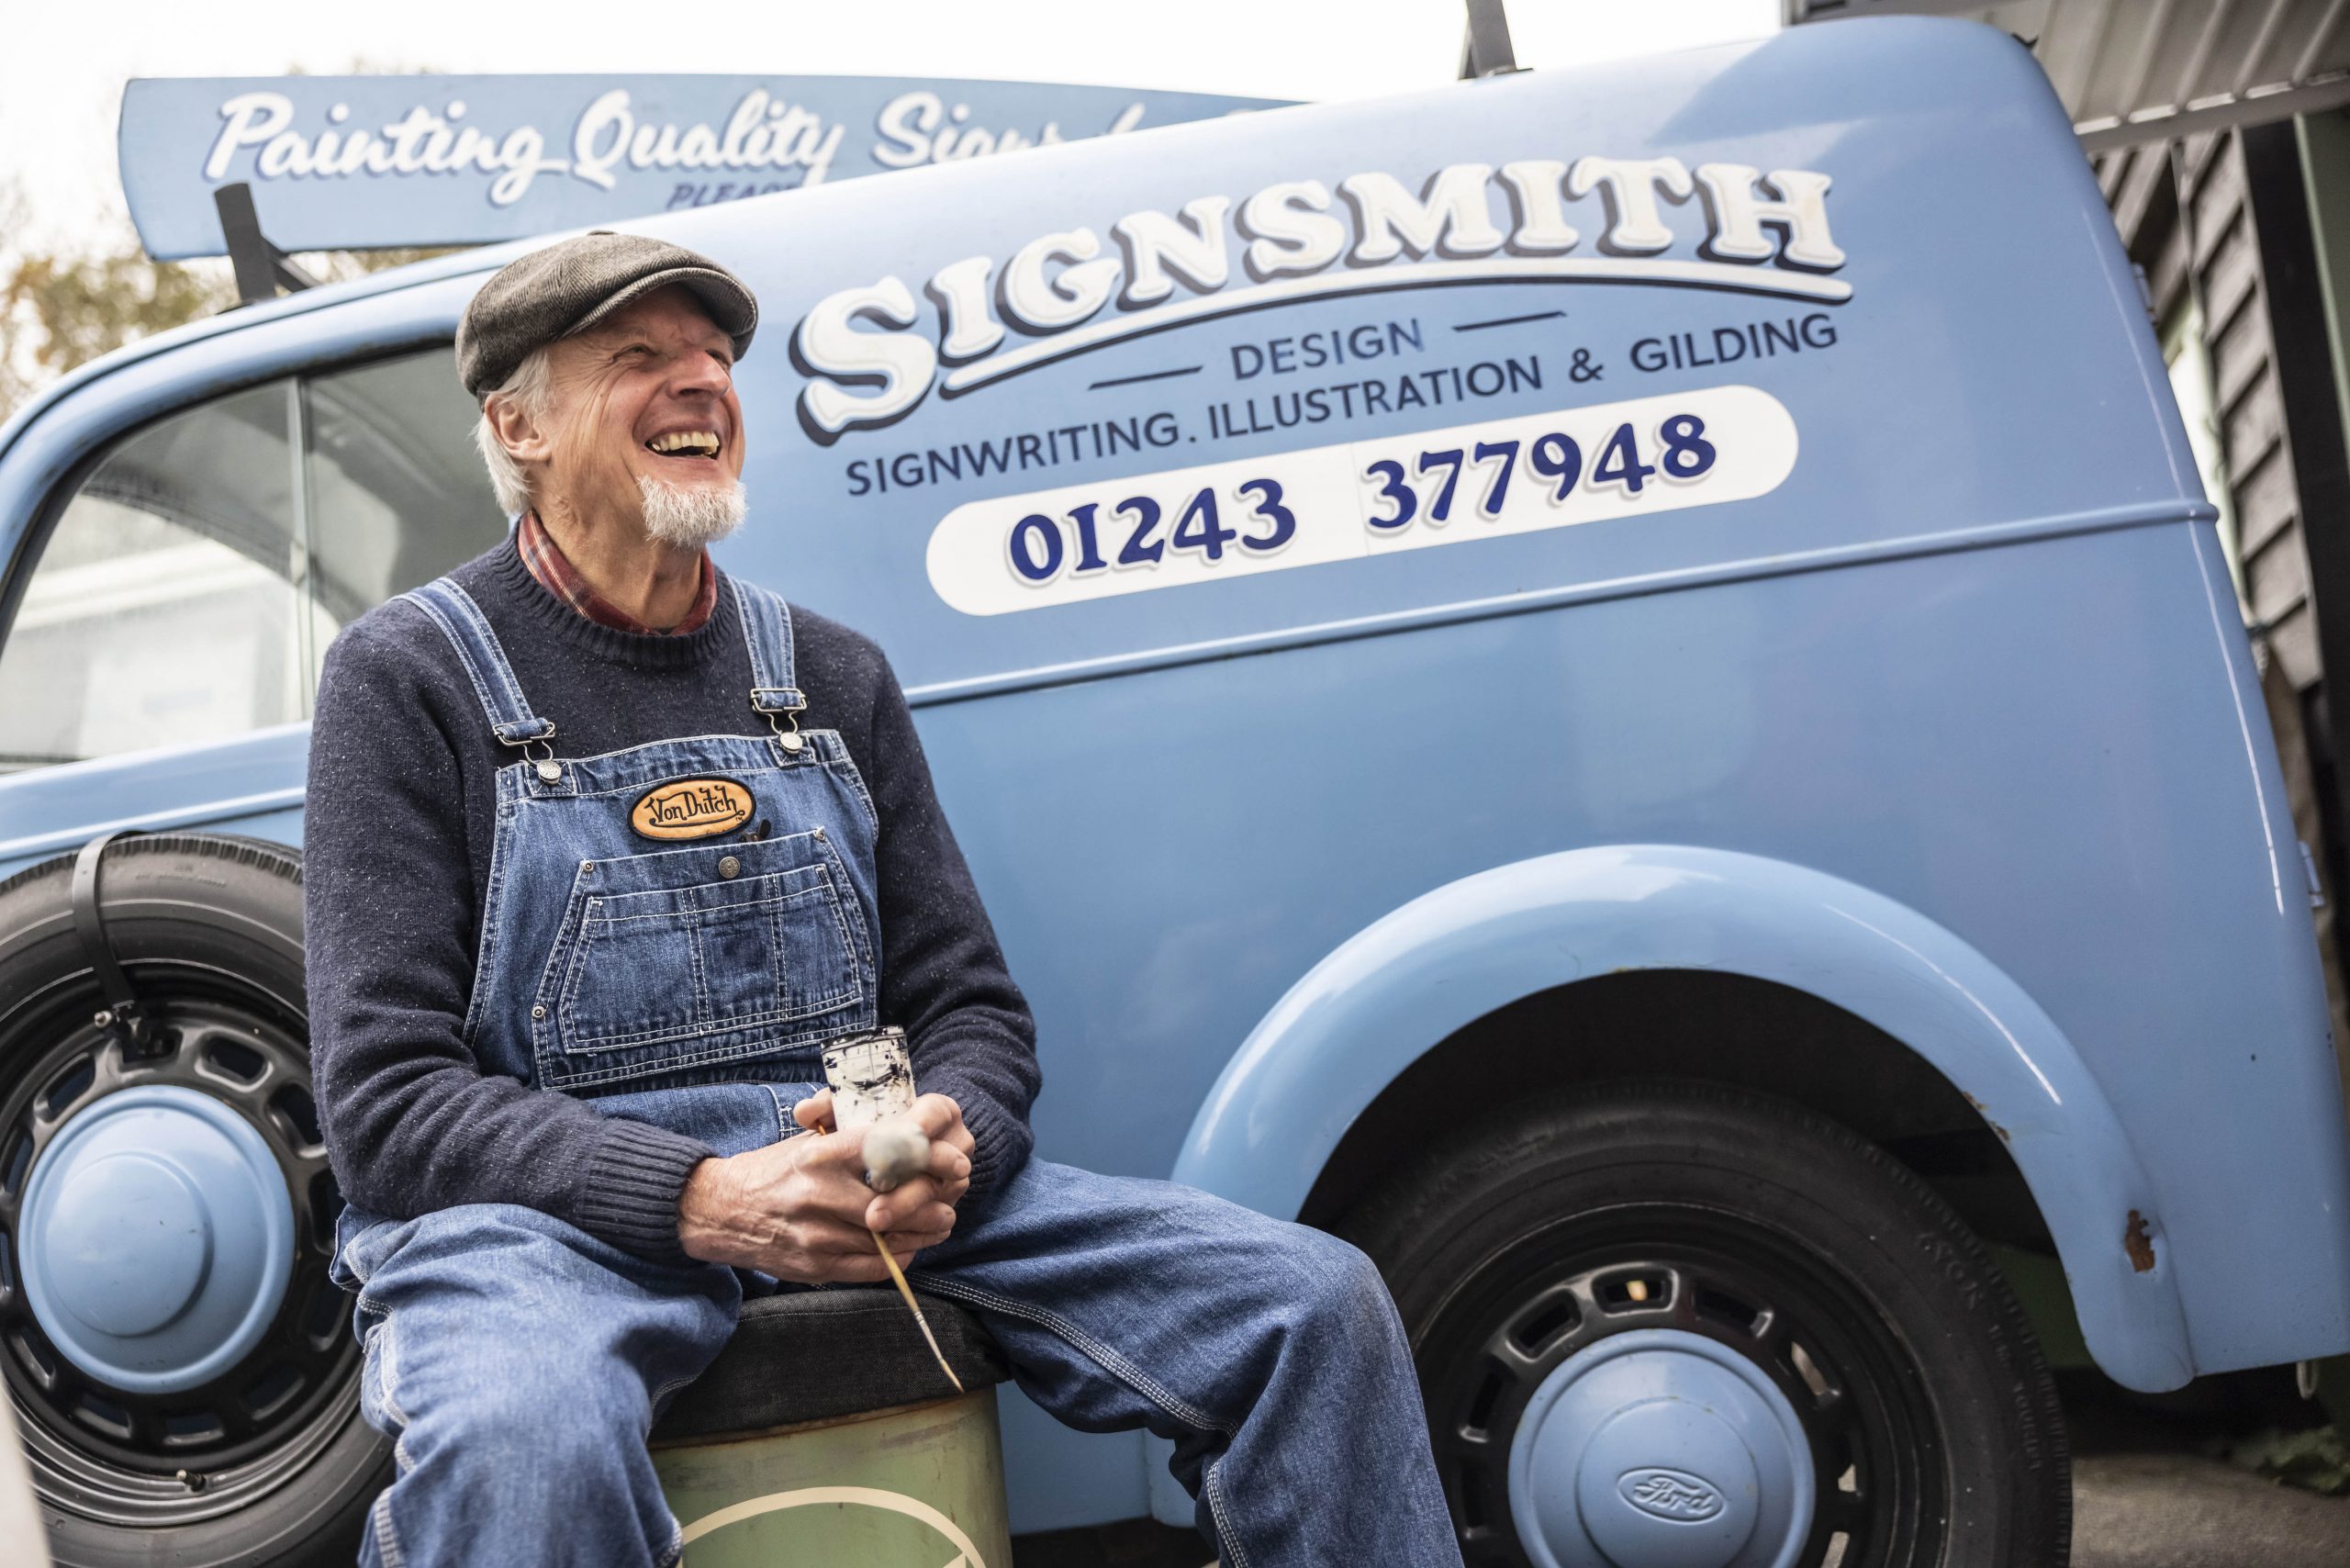 A sixth sense, a shaky hand and finding the sweet spot: Terry Smith reveals the secrets of signwriting